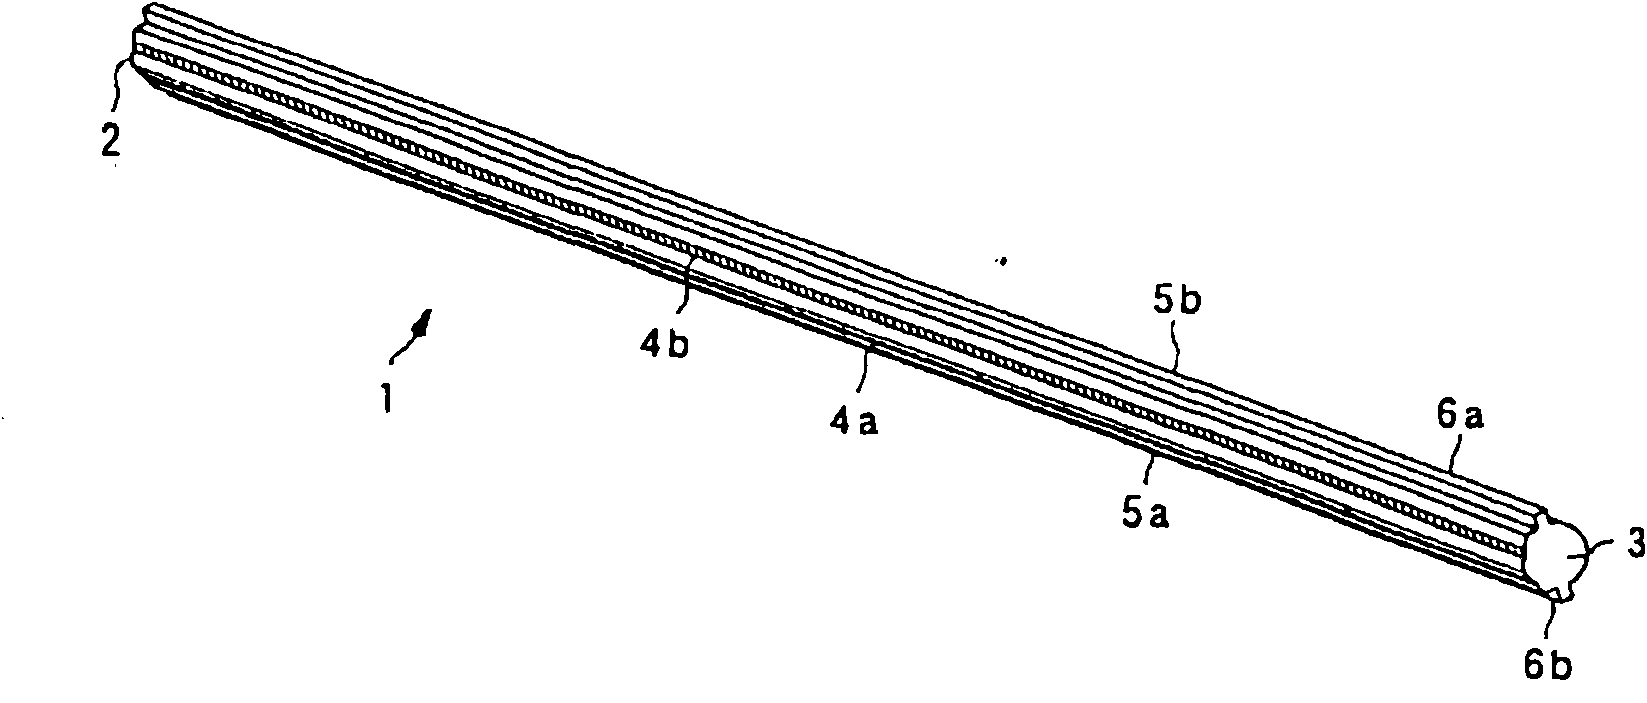 Light guide body and bicomponent linear light source device